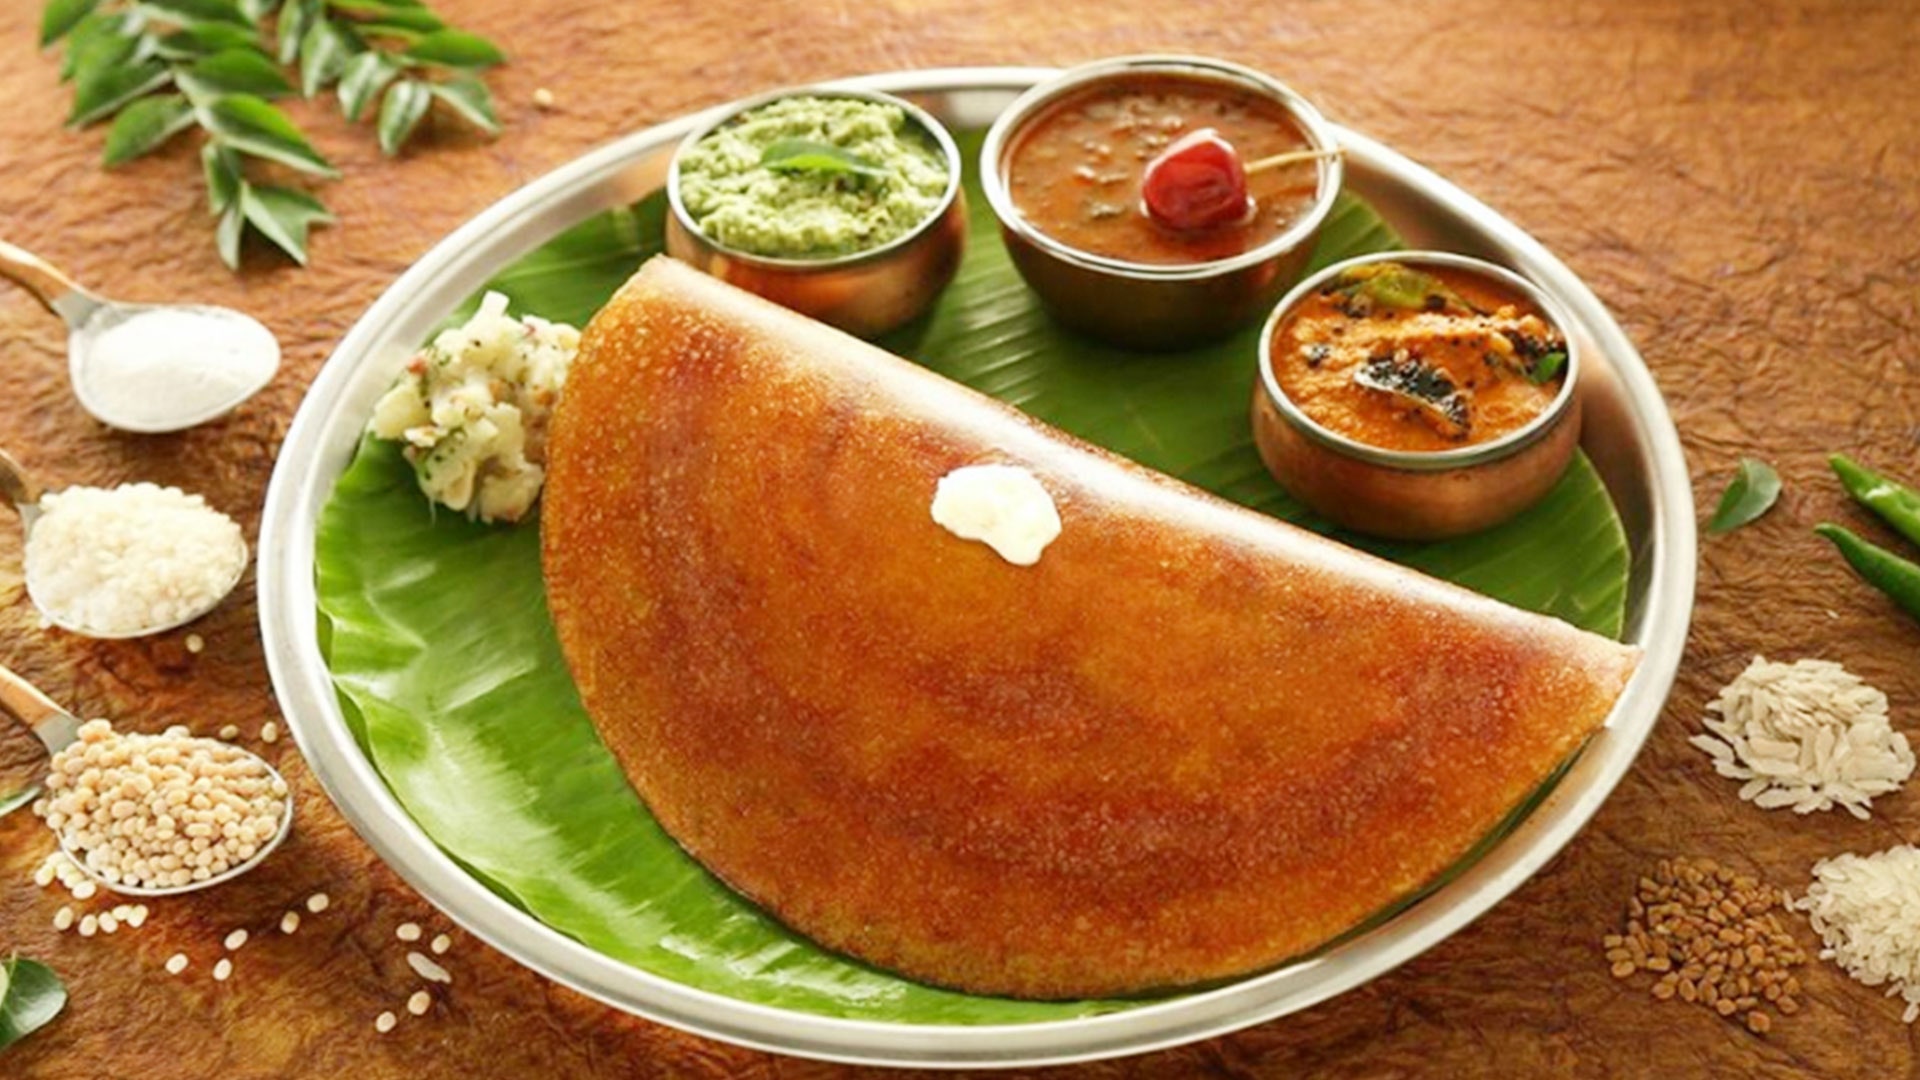 Butter Paper Masala Dosa | Free Home Delivery- Orders Above 200 Rupees